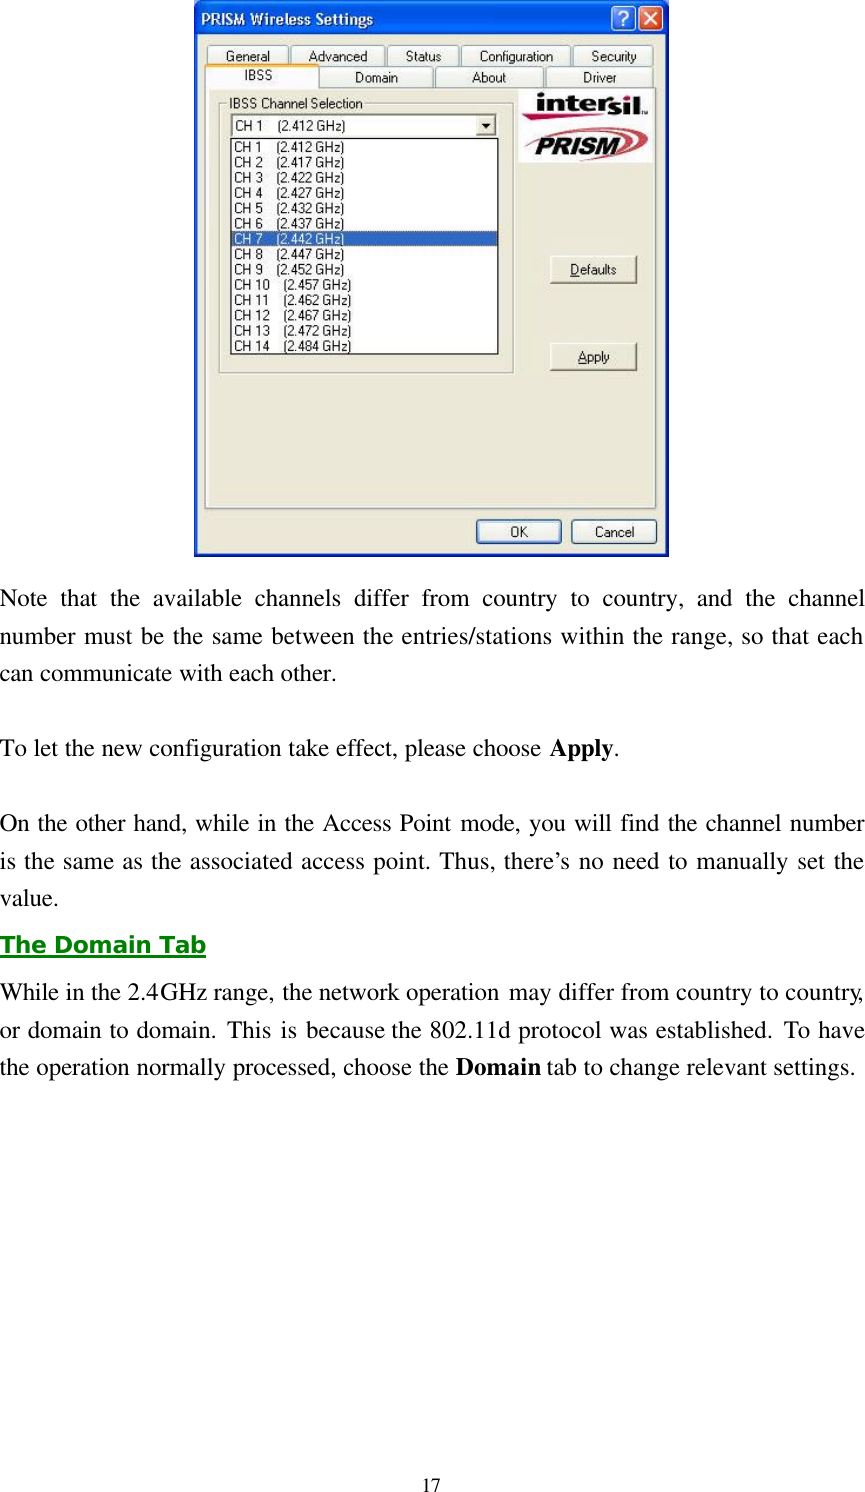  17  Note that the available channels differ from country to country, and the channel number must be the same between the entries/stations within the range, so that each can communicate with each other.  To let the new configuration take effect, please choose Apply.  On the other hand, while in the Access Point mode, you will find the channel number is the same as the associated access point. Thus, there’s no need to manually set the value. The Domain Tab While in the 2.4GHz range, the network operation may differ from country to country, or domain to domain. This is because the 802.11d protocol was established. To have the operation normally processed, choose the Domain tab to change relevant settings. 